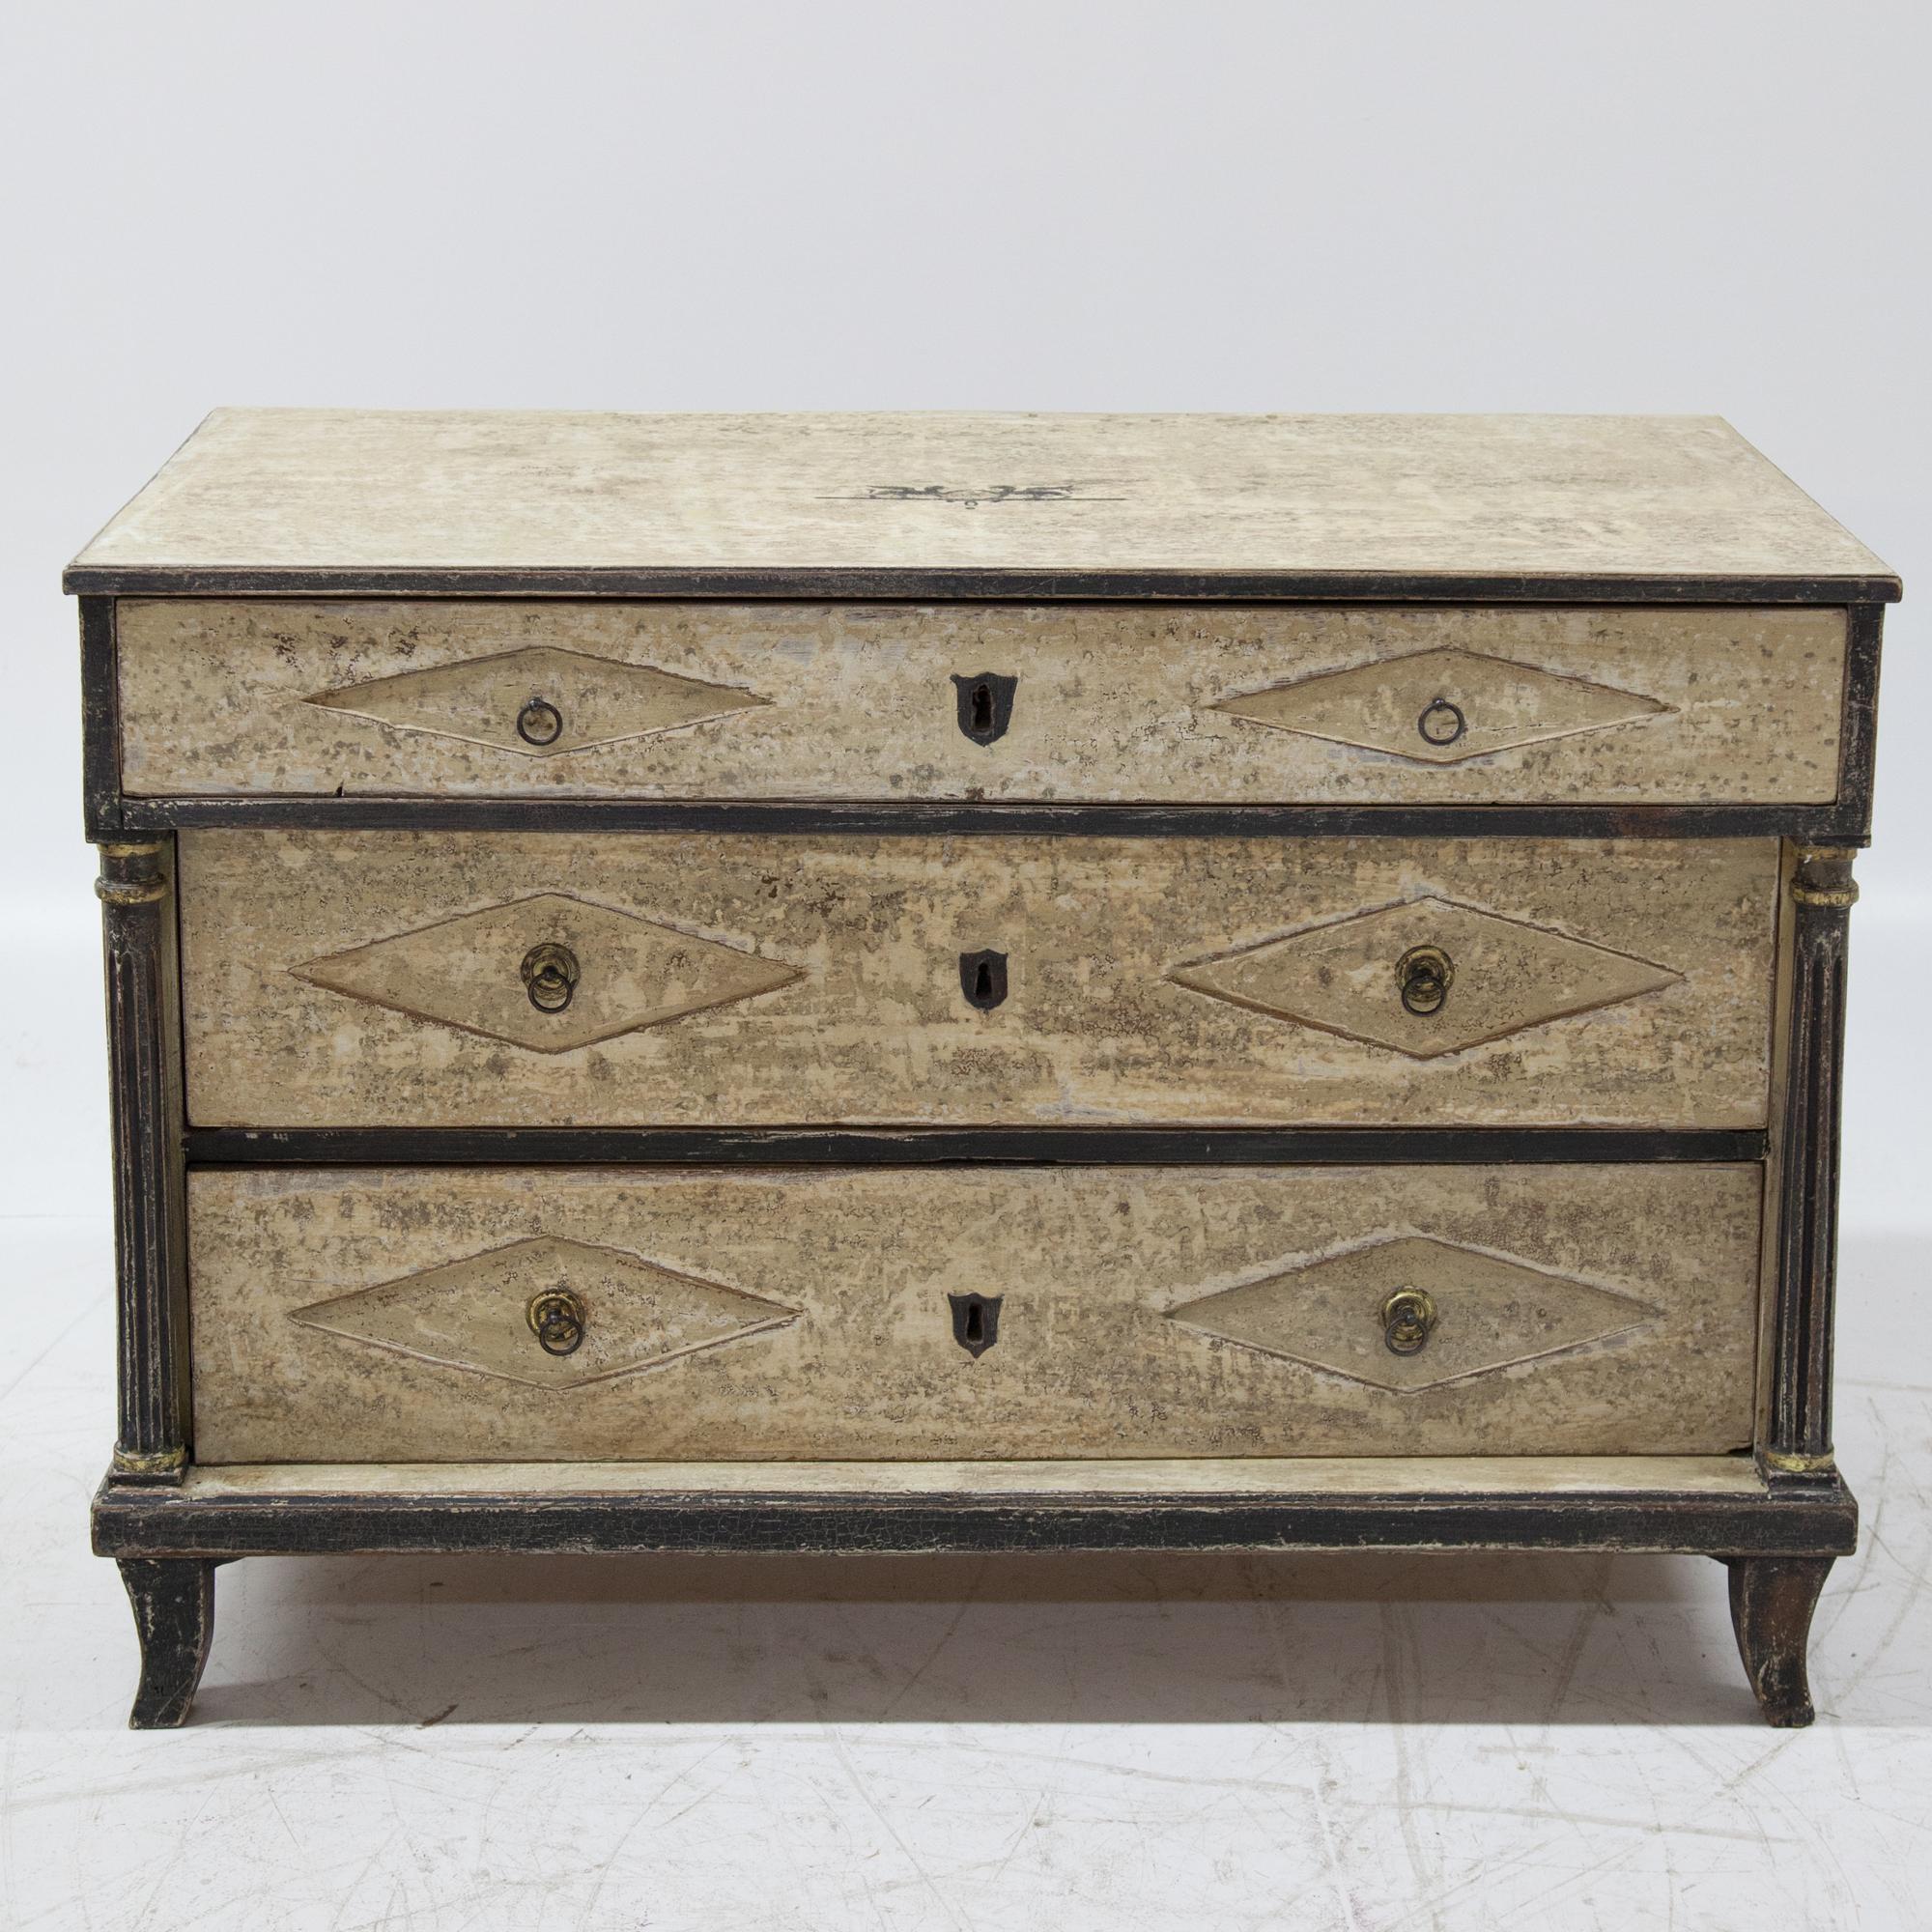 Franconian Biedermeier chest of drawers with three drawers on flared feet with fluted full columns and a top drawer resting on top. Solid oak. The beige paint has been redesigned according to historical models and has a decorative patina.